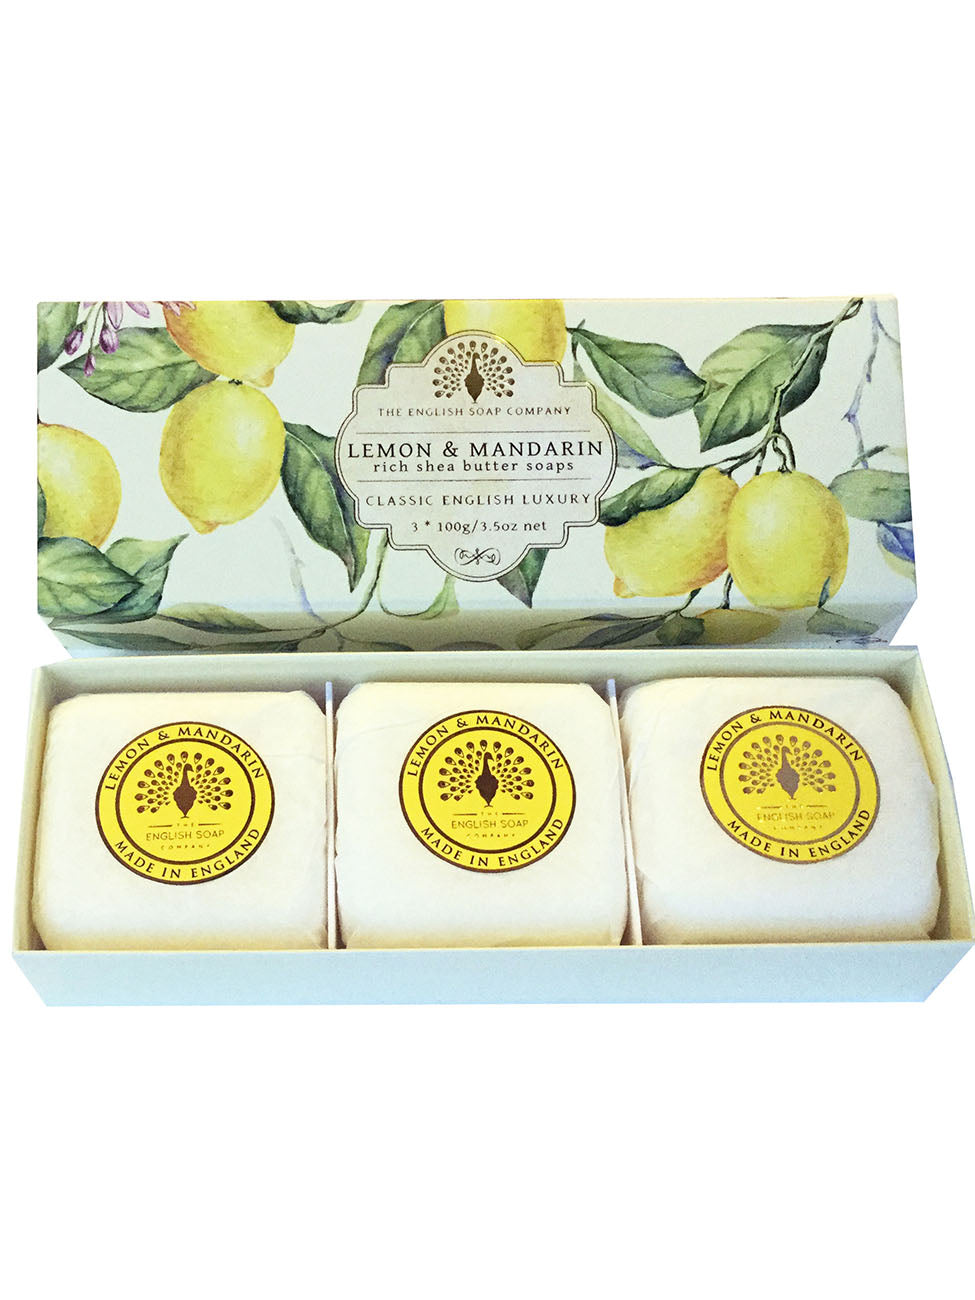 A box of The English Soap Co. Vintage Lemon & Mandarin scented hand soaps, featuring three round, yellow bars labeled 'cole & marten', inside a box with a painted lemon branch design.